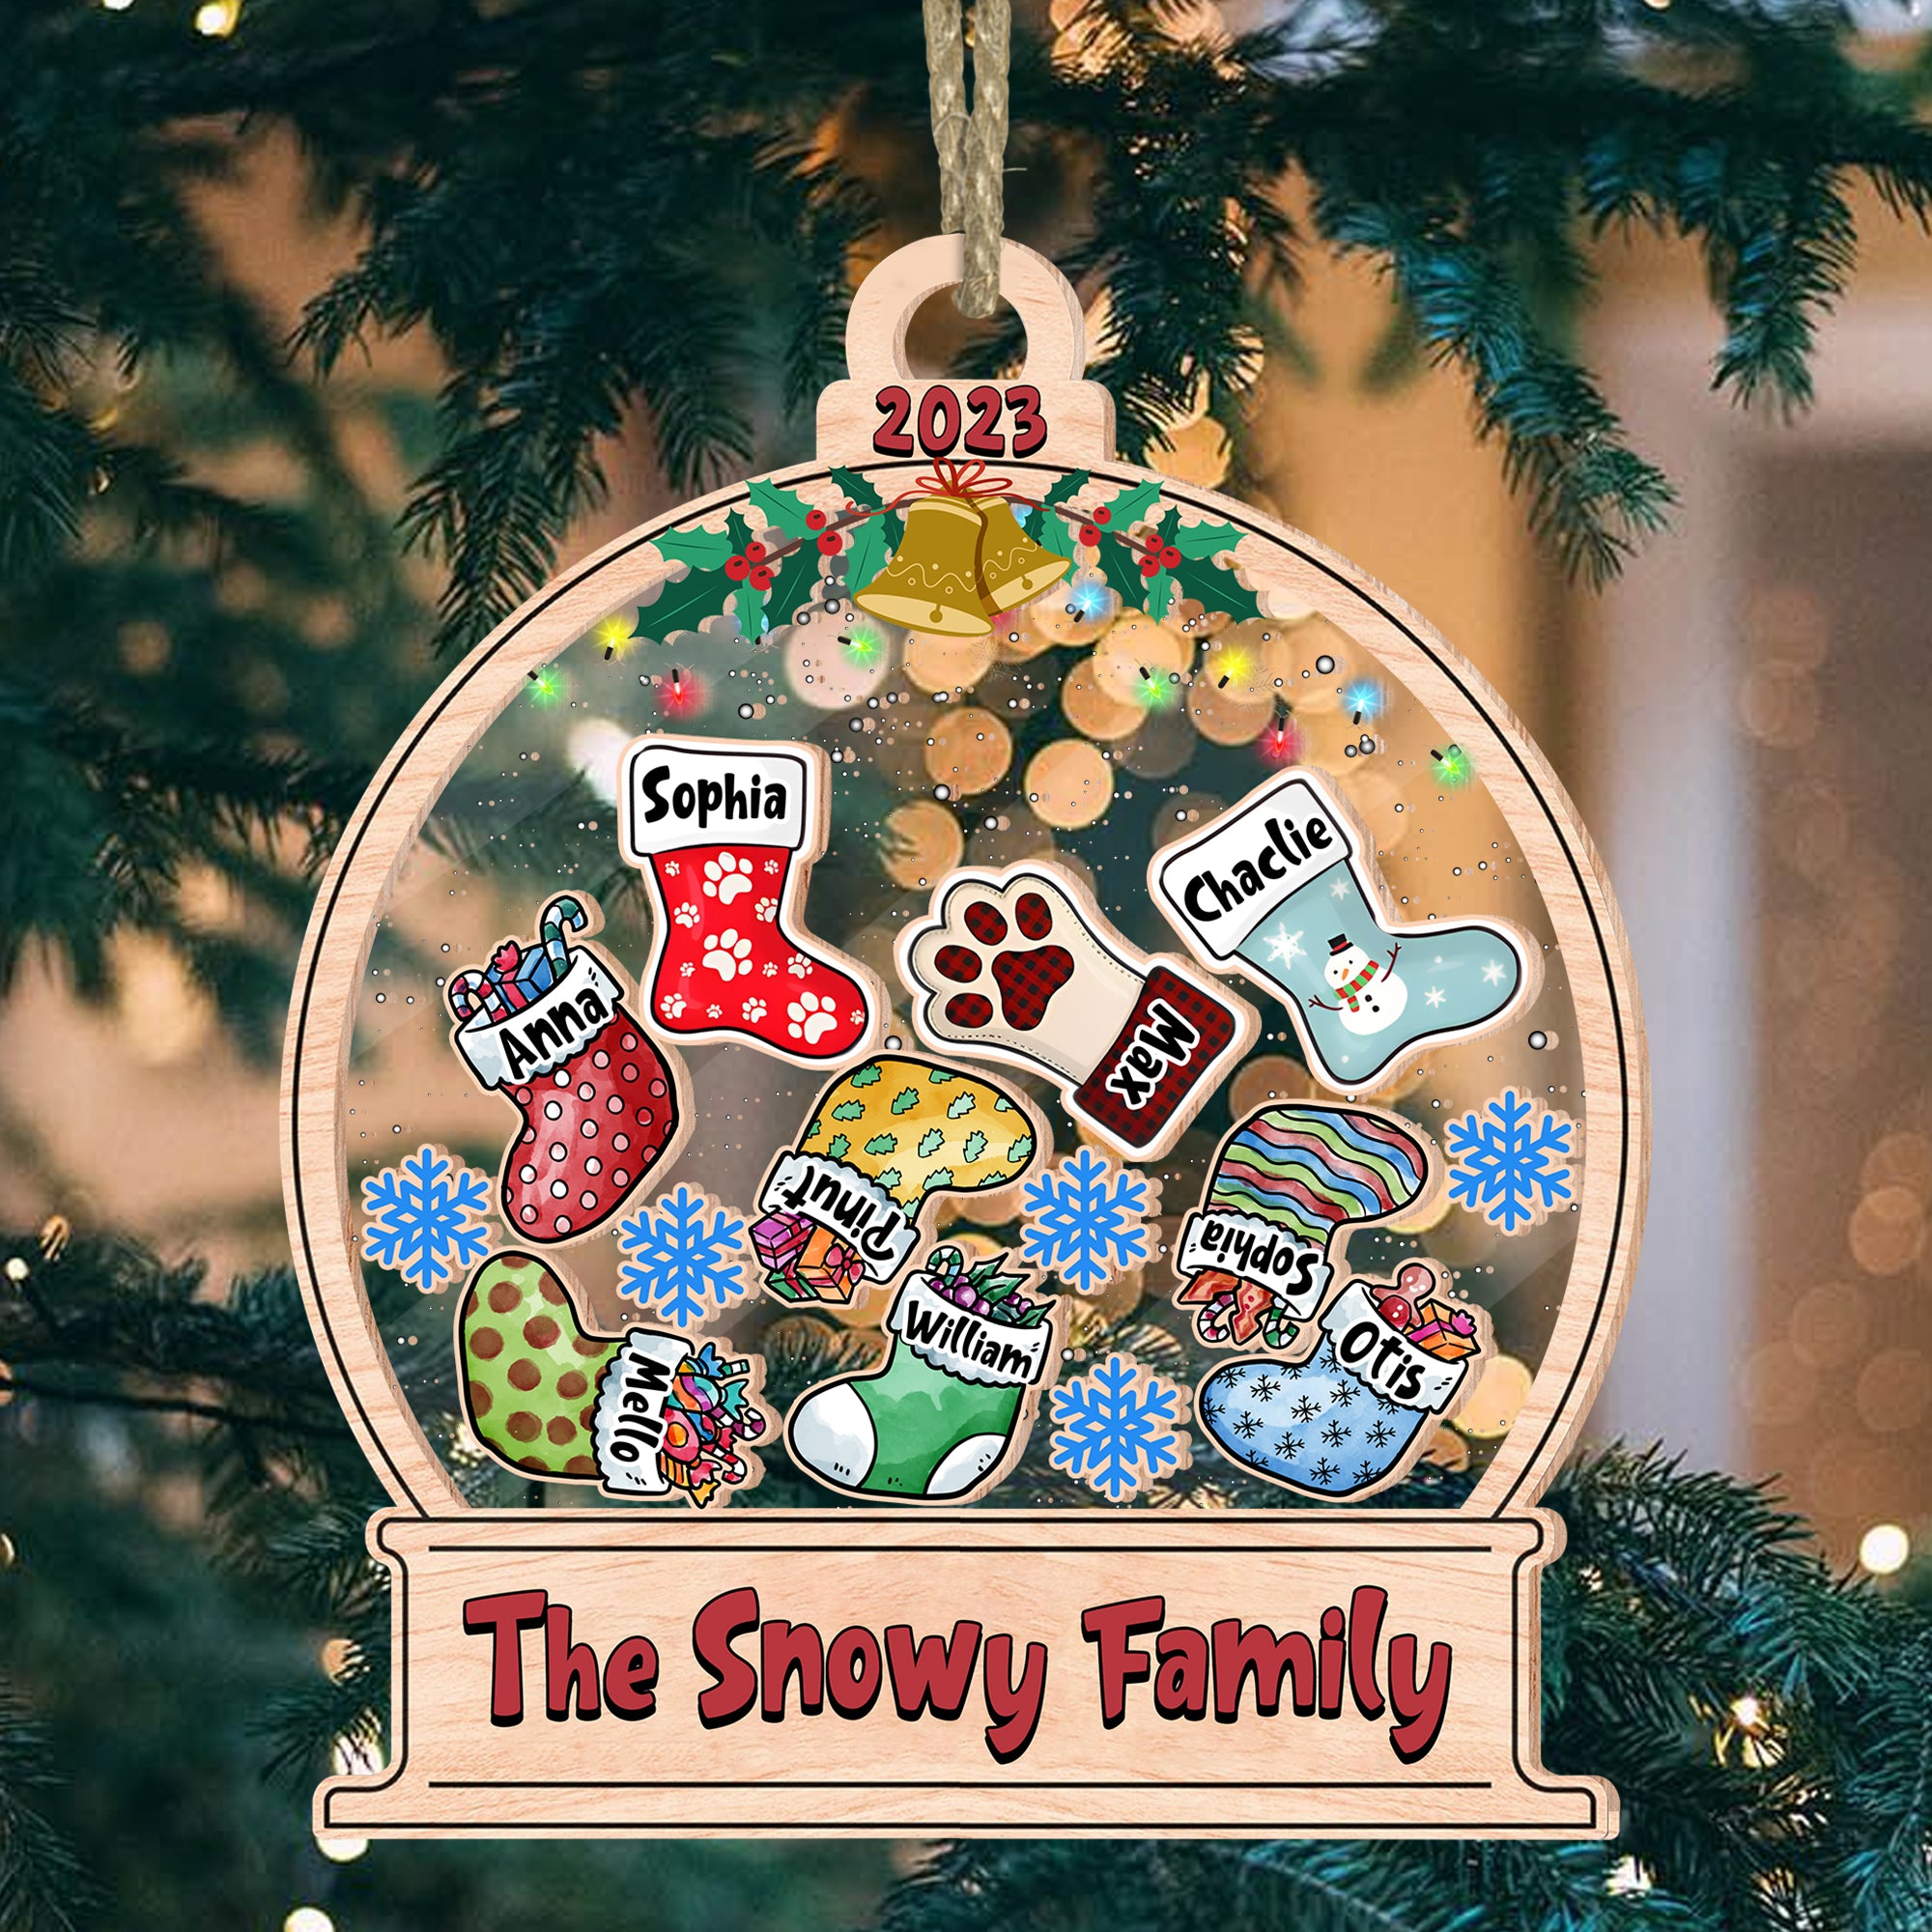 Personalized Ornament - Christmas Gift For Family - Colorful Family Stockings - Custom Shaker Ornament